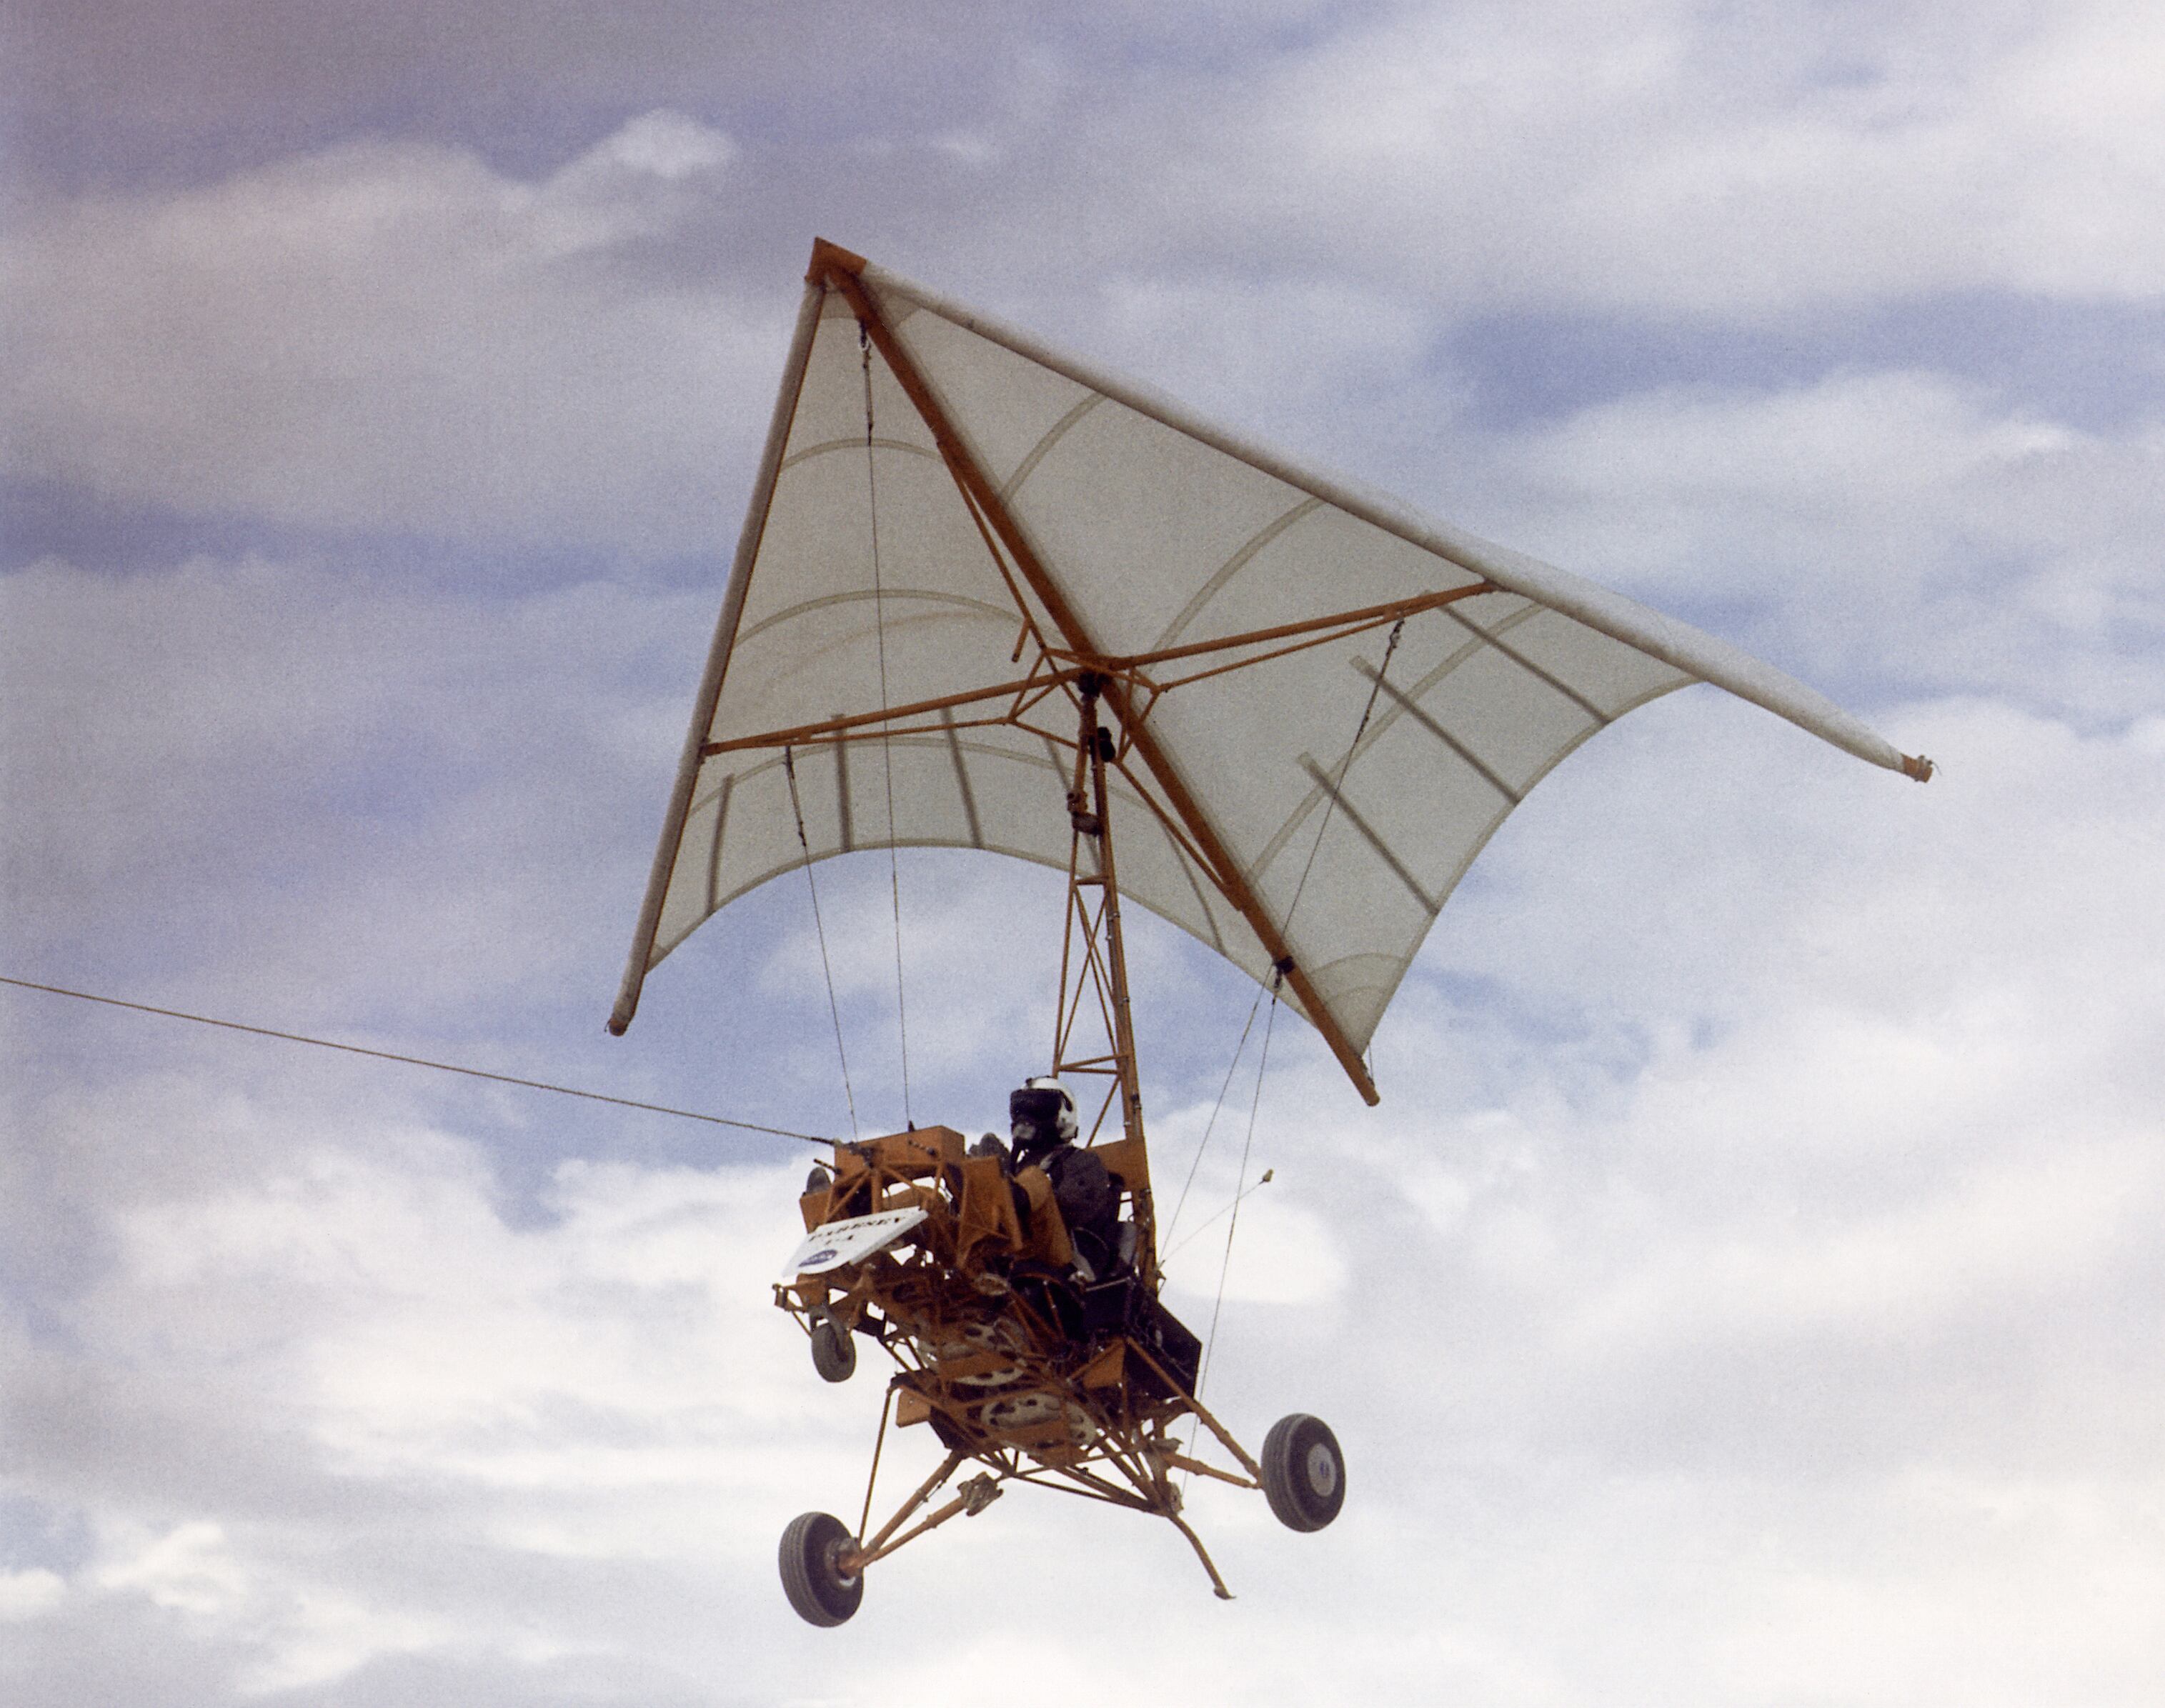 The flexible wing was created in 1948 by NASA engineer Francis Rogallo to recover space capsules, but it was discarded in favor of parachutes.